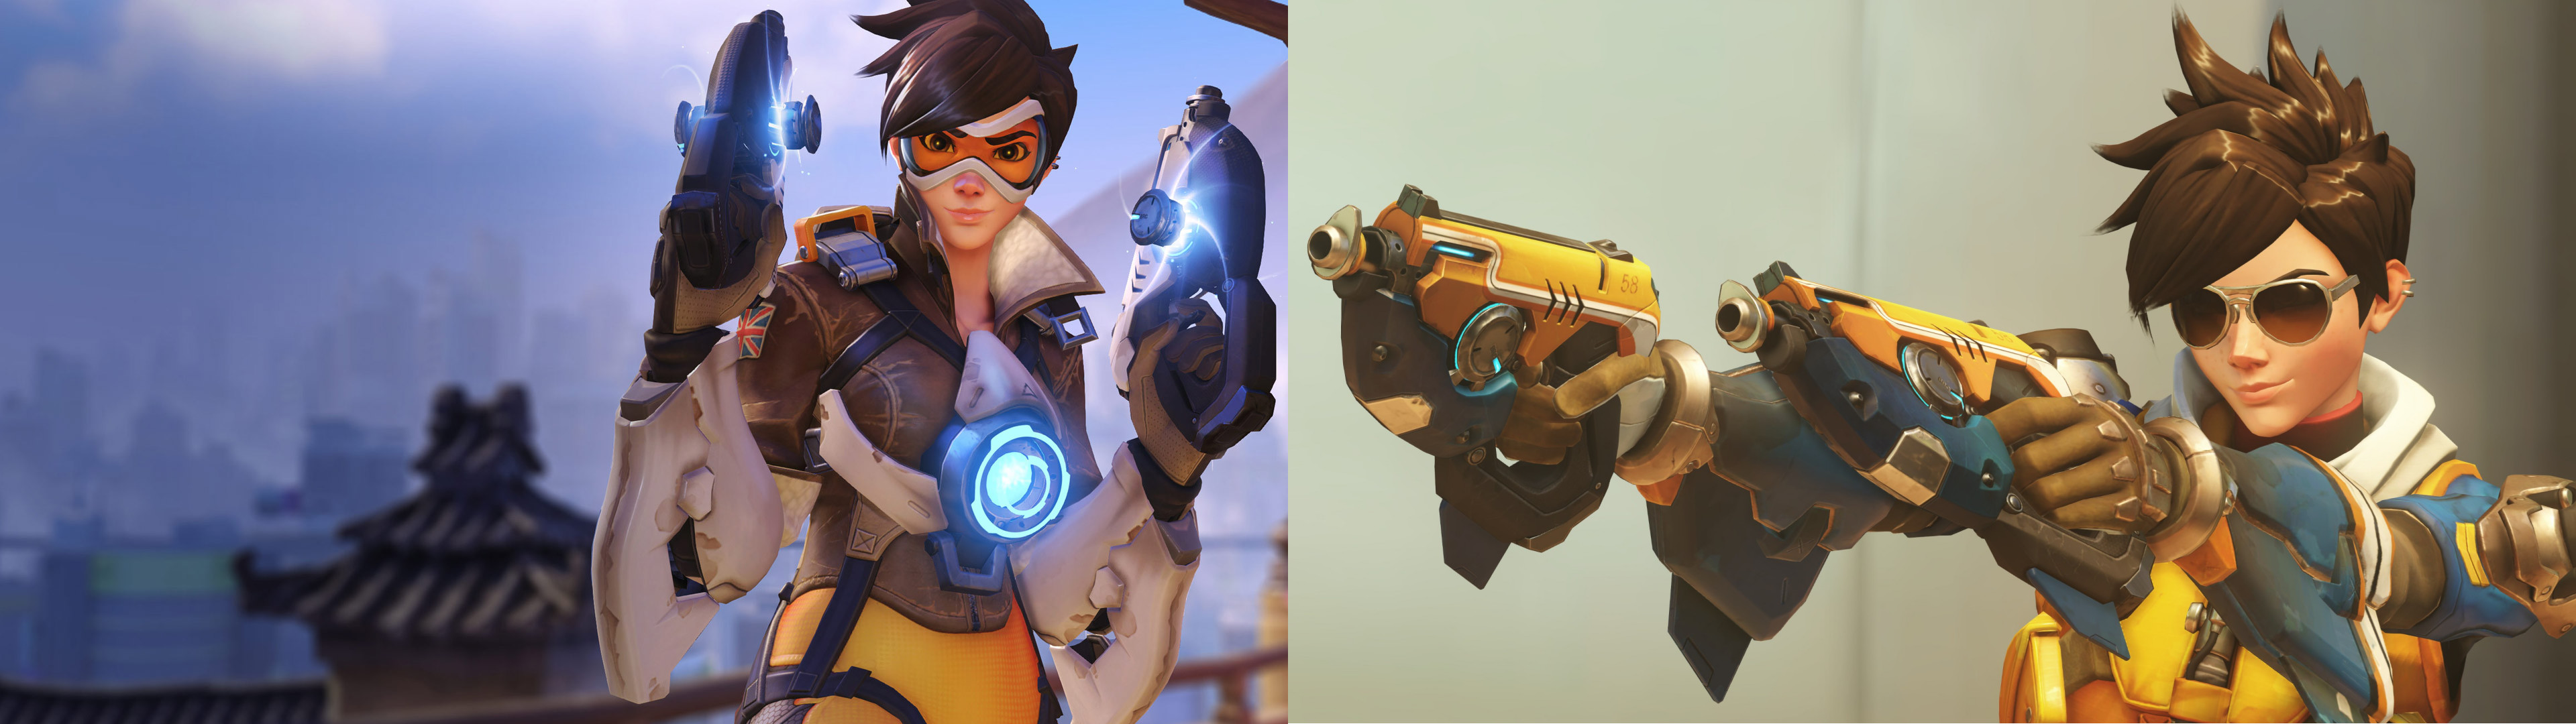 Overwatch Tracer Dual Monitor Wallpaper 3840×1080